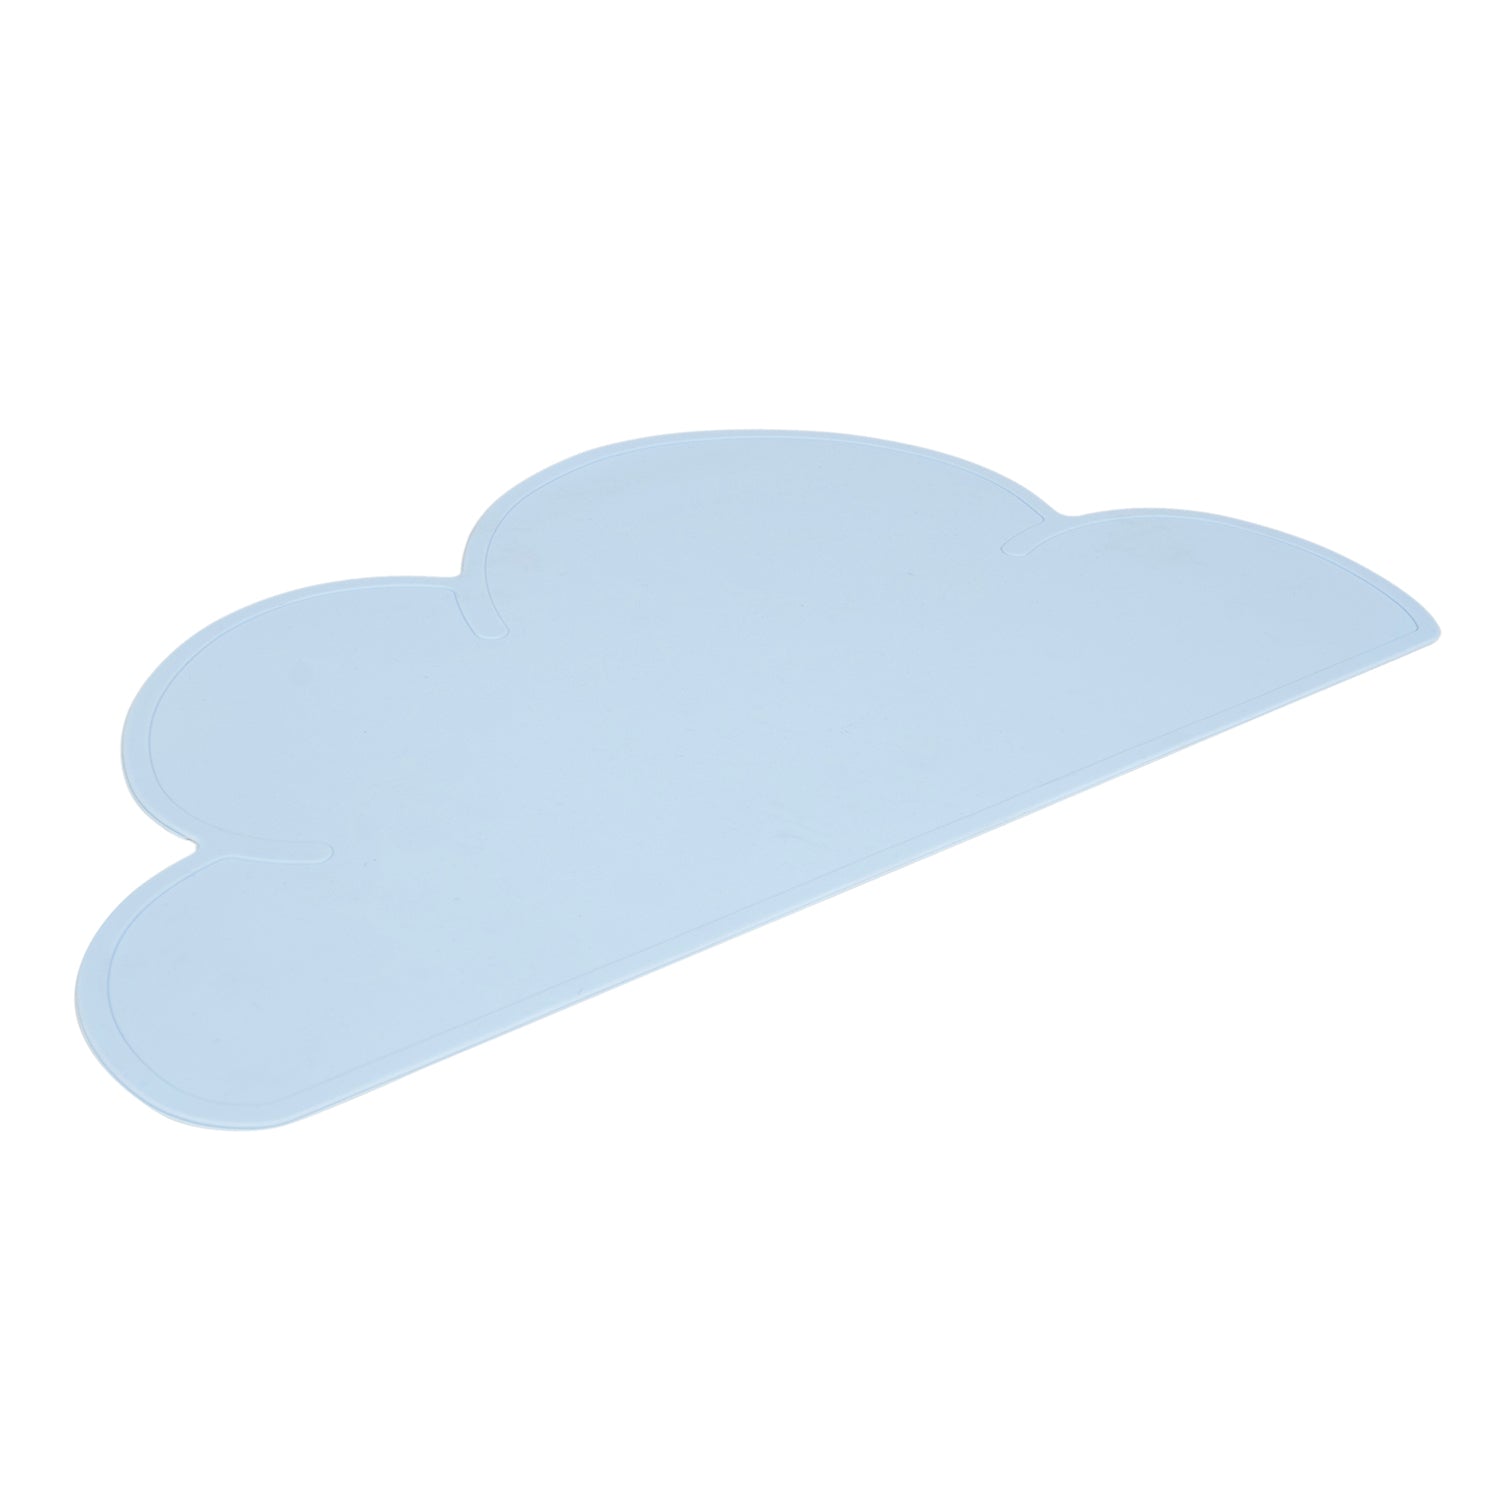 Baby Moo Cloud Shaped Kids Dining Table Silicone Waterproof Placemat - Blue